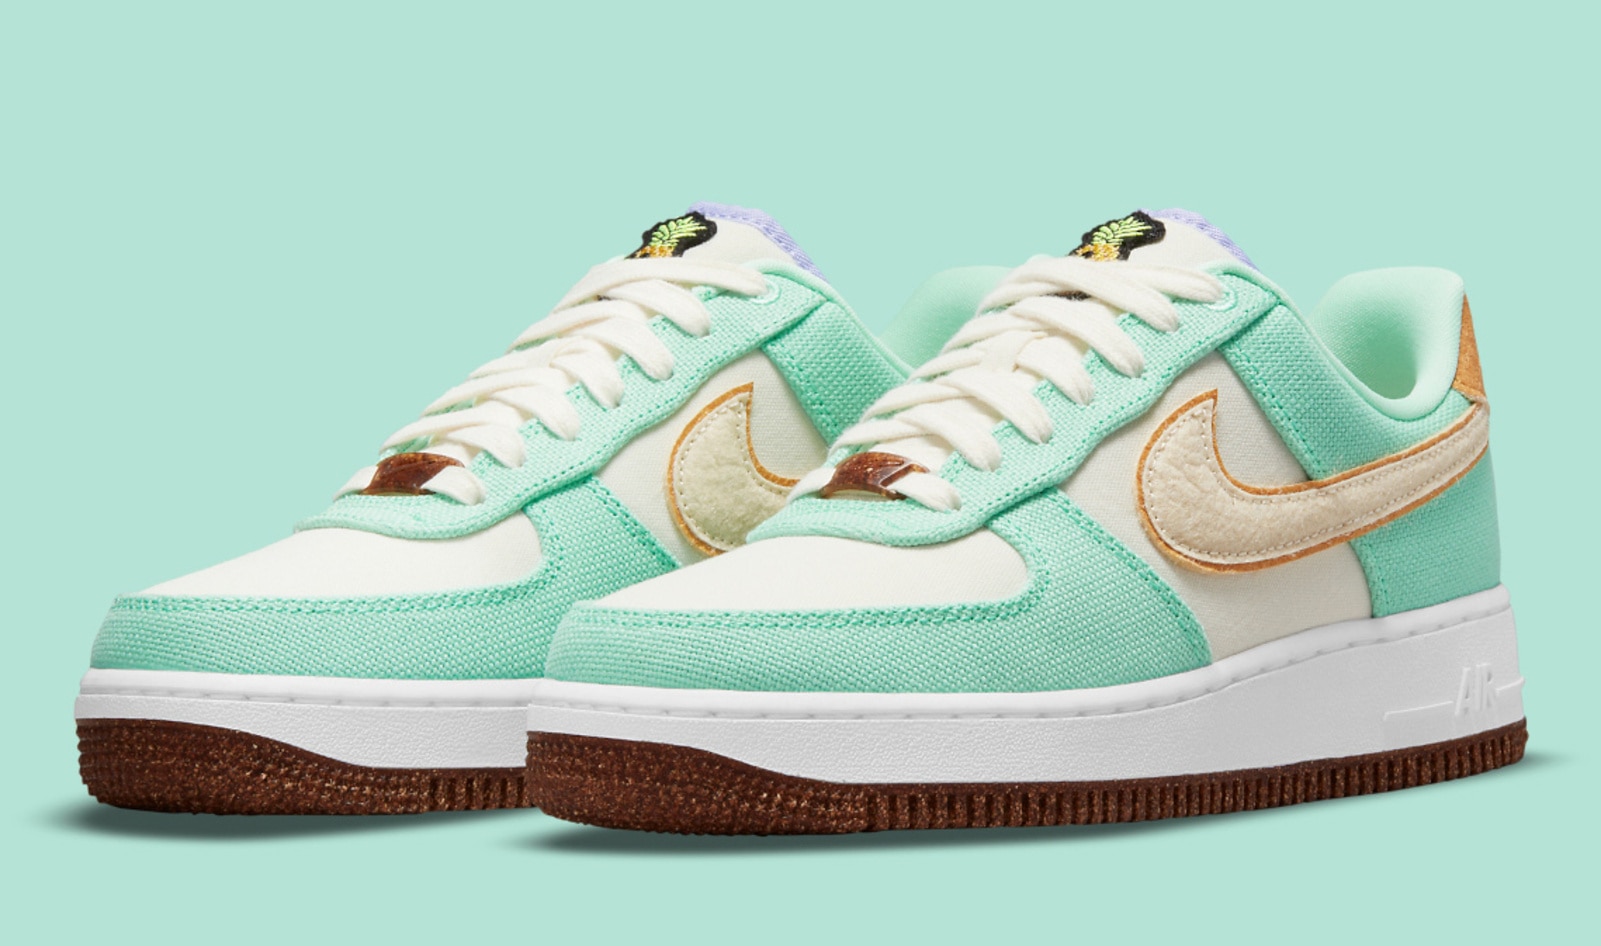 Nike’s Iconic Air Force Ones Get a Vegan Pineapple Leather Makeover